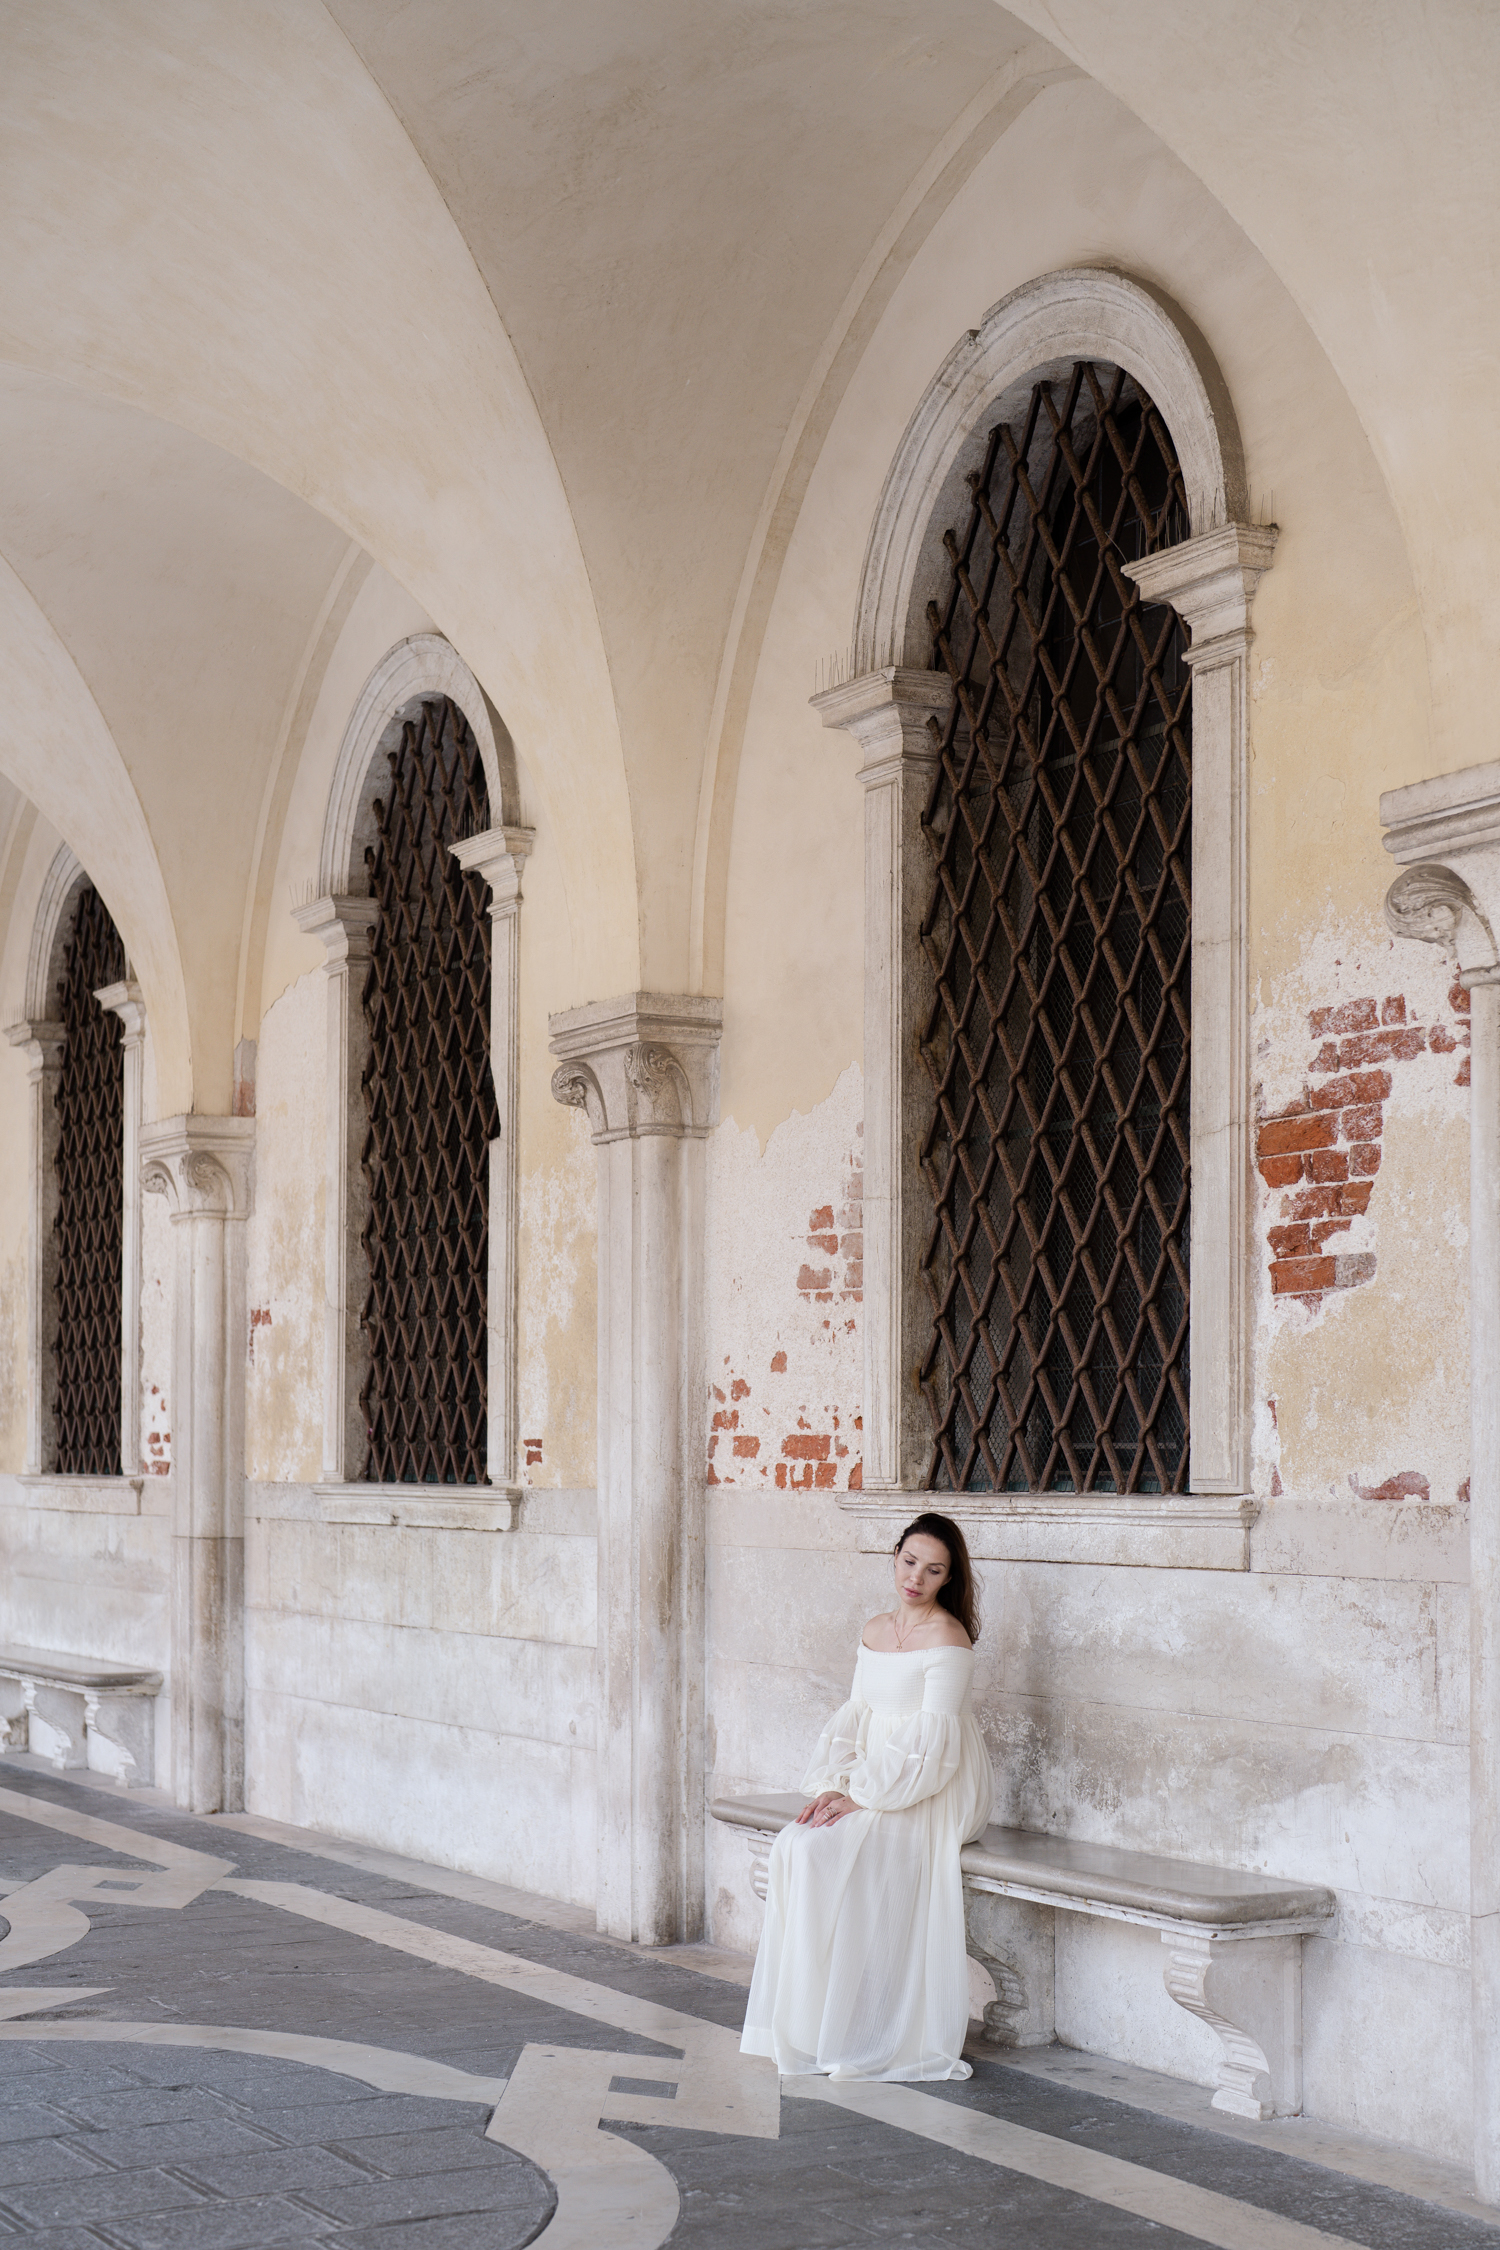 Poses and locations for a sunrise portrait photoshoot in St Marks Square in Venice with the best local photographer, Alina Indi.